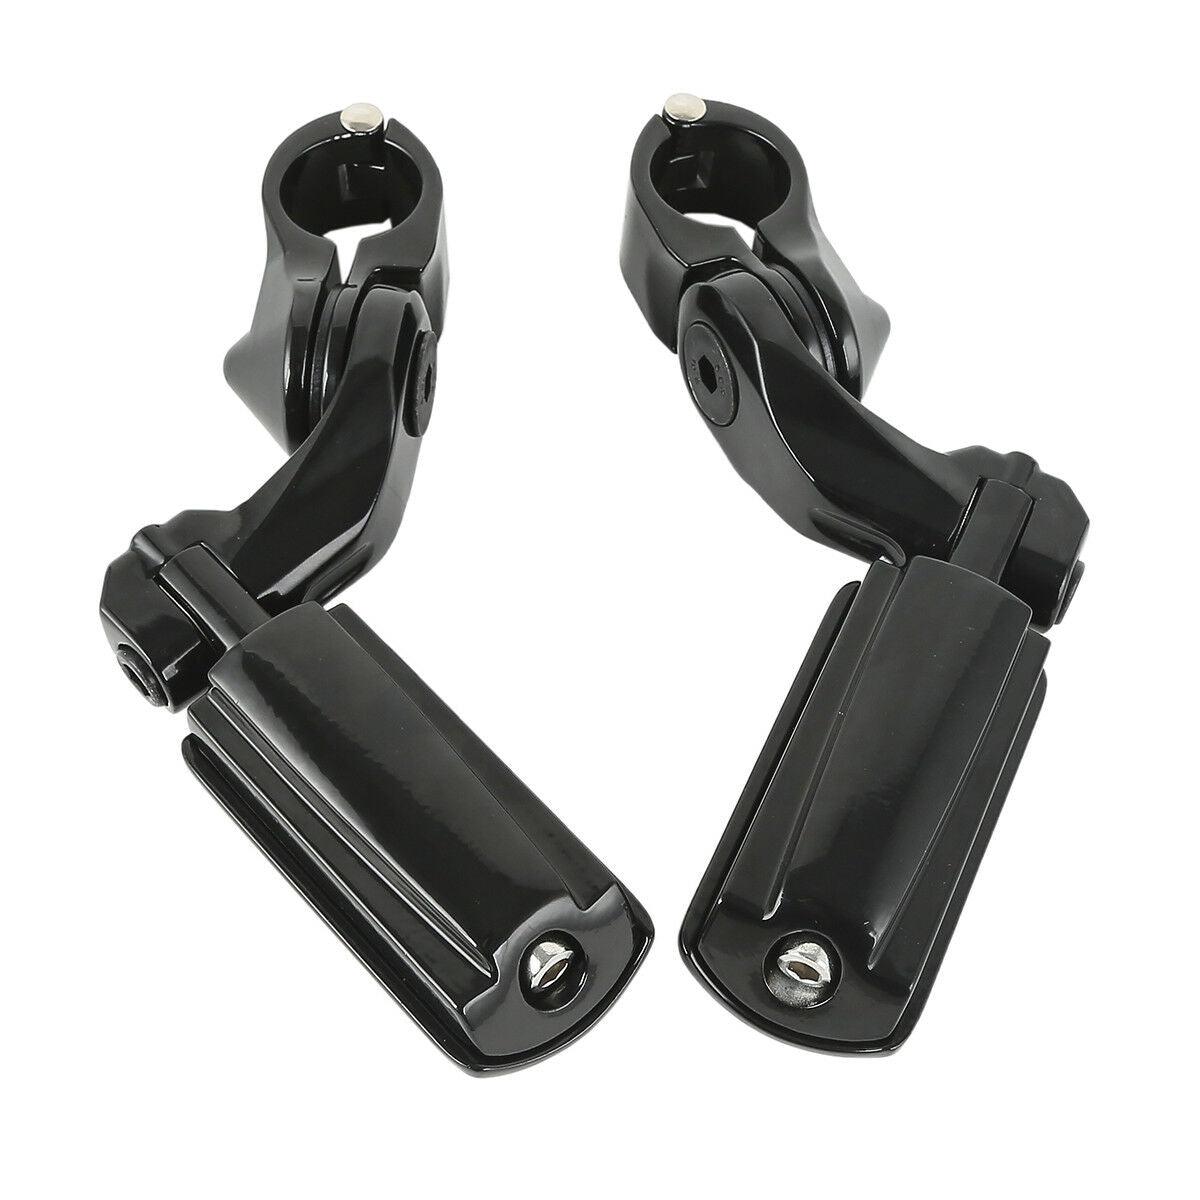 Black 1 1/4" Highway Foot Pegs Fit For Harley Road King Electra Street Glide - Moto Life Products